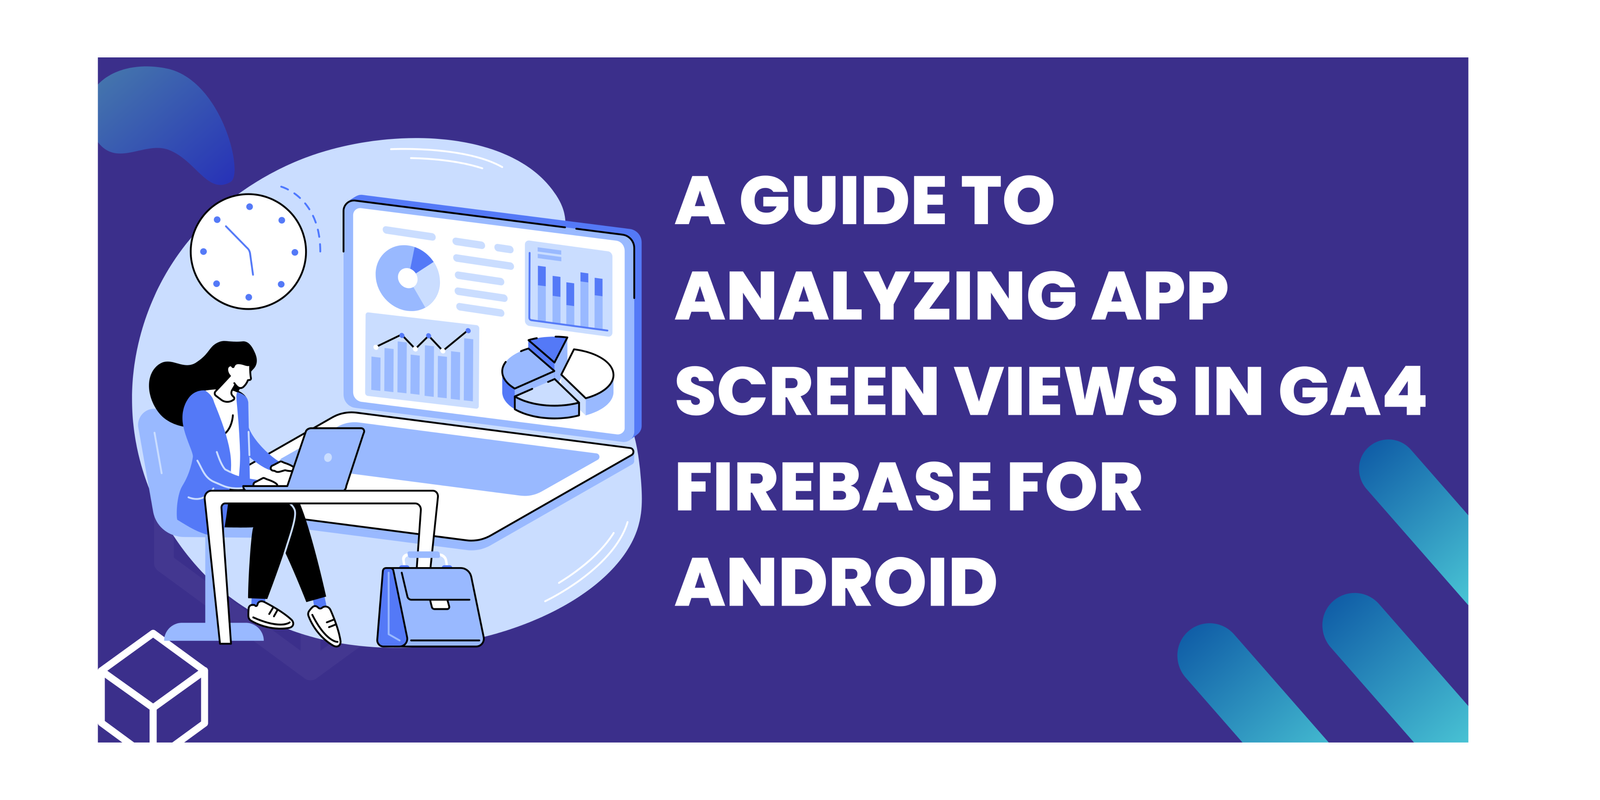 A guide to analyzing app screen views in GA4 Firebase for Android